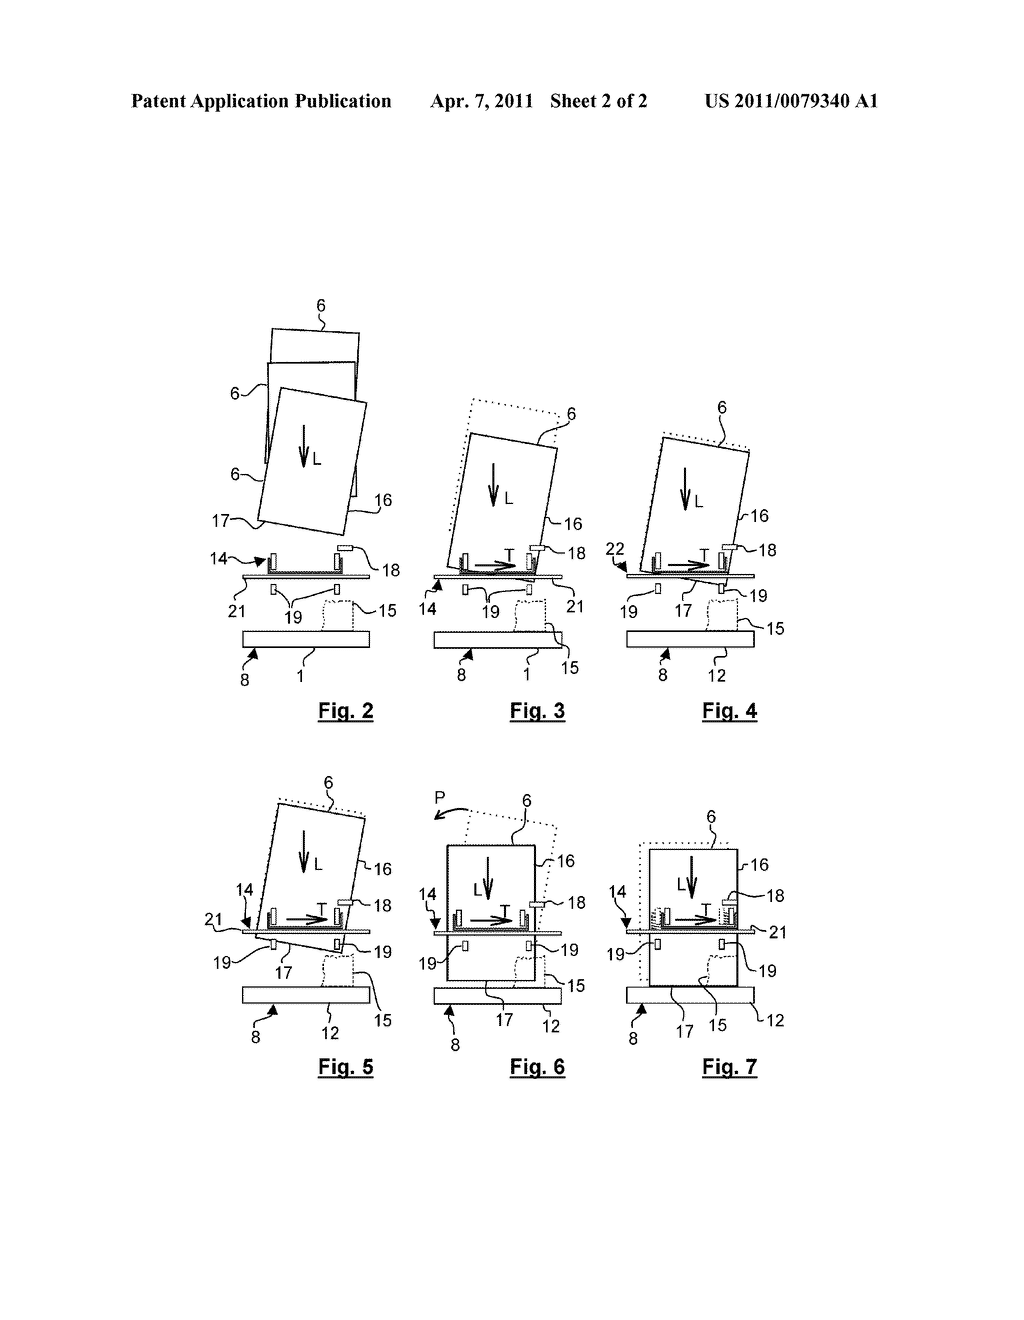 METHOD FOR MANUFACTURING A MULTI-LAYER COMPOSITE, ARRANGEMENT FOR POSITIONING A SHEET-LIKE ELEMENT ONTO A BACKING IN A LAMINATING UNIT - diagram, schematic, and image 03